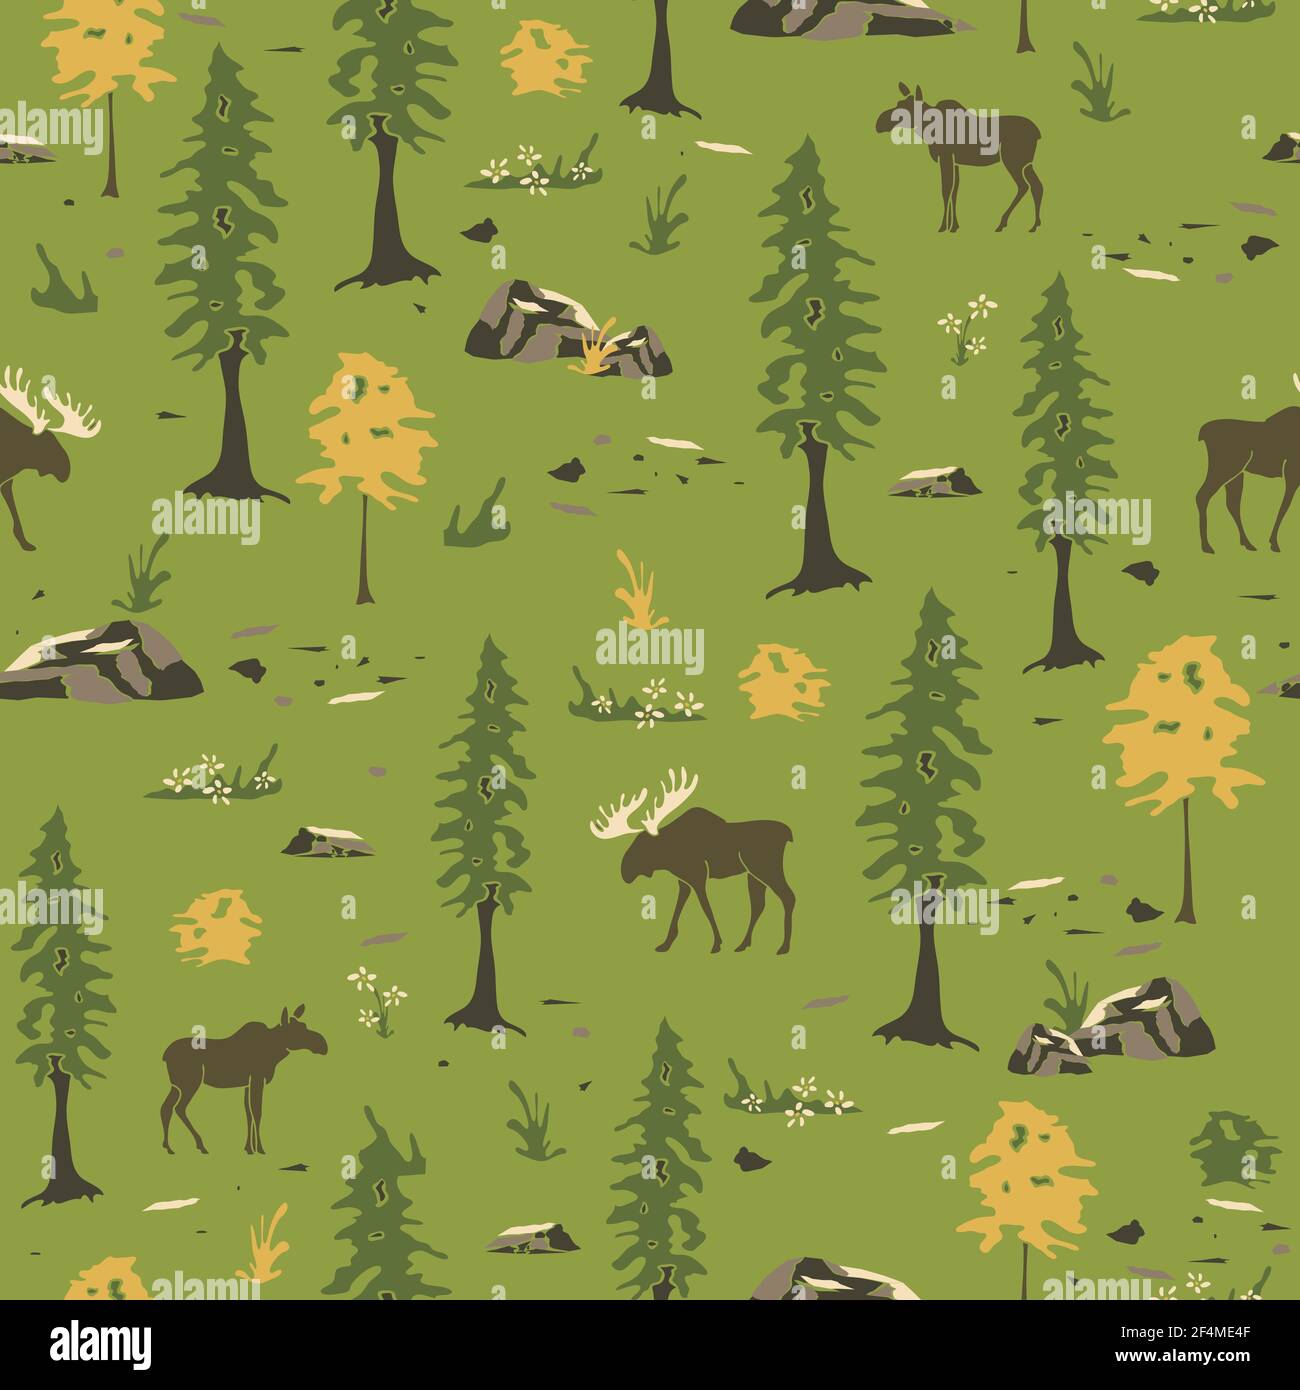 Seamless vector pattern with moose in forest on green background. Canada wild animal wallpaper design Scandinavian landscape. Stock Vector